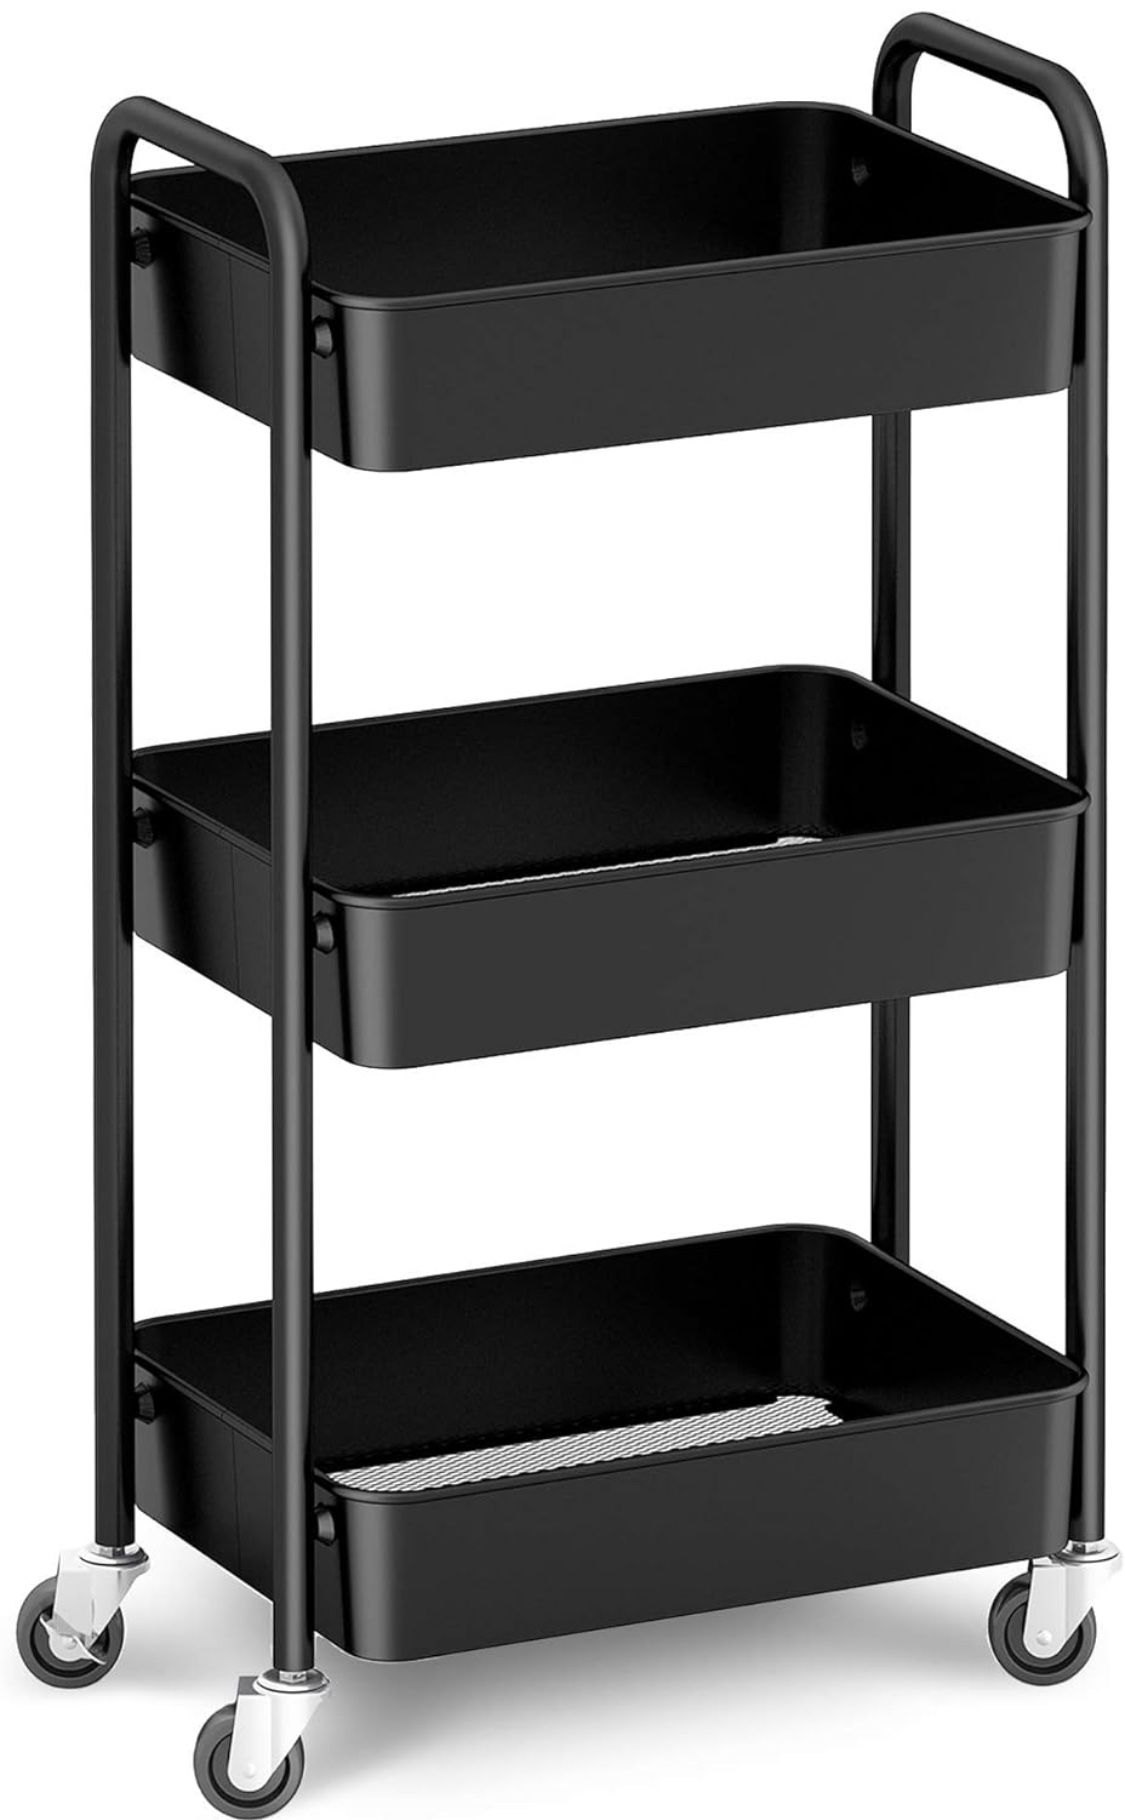 3-Tier Rolling Metal Storage Organizer - Mobile Utility Cart, Kitchen Cart with Caster Wheels